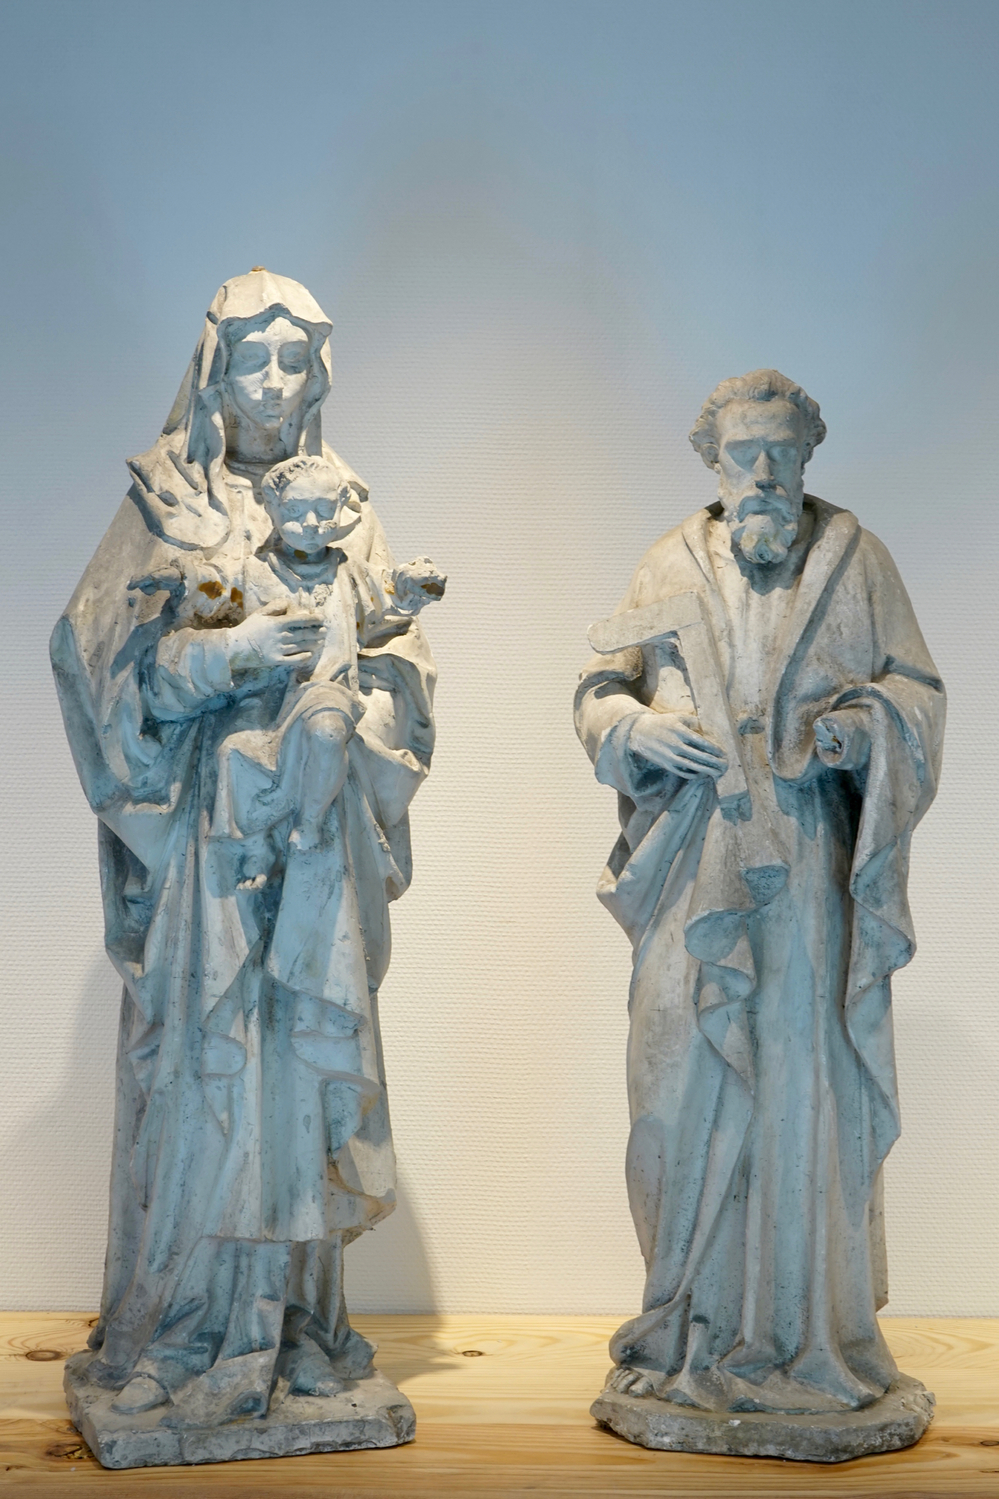 A set of two 100 cm plaster casts of religious figures, one Judas Thaddeus, 19/20th C., Bruges